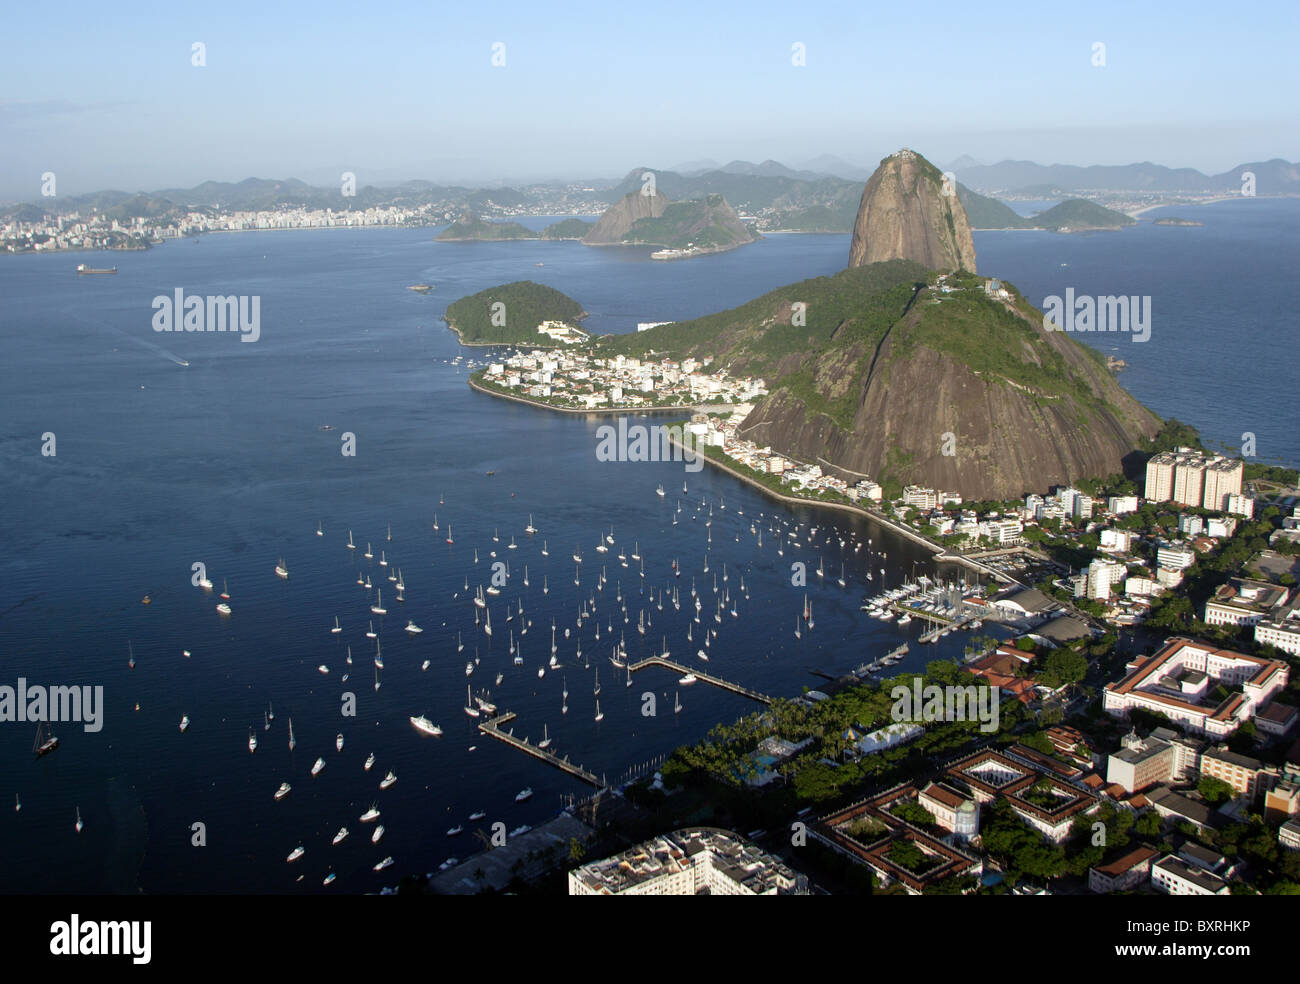 Brazil, Rio de Janeiro, City view from Mirante Dona Marta overlooking modern city with Sugar Loaf Mountain in distance Stock Photo